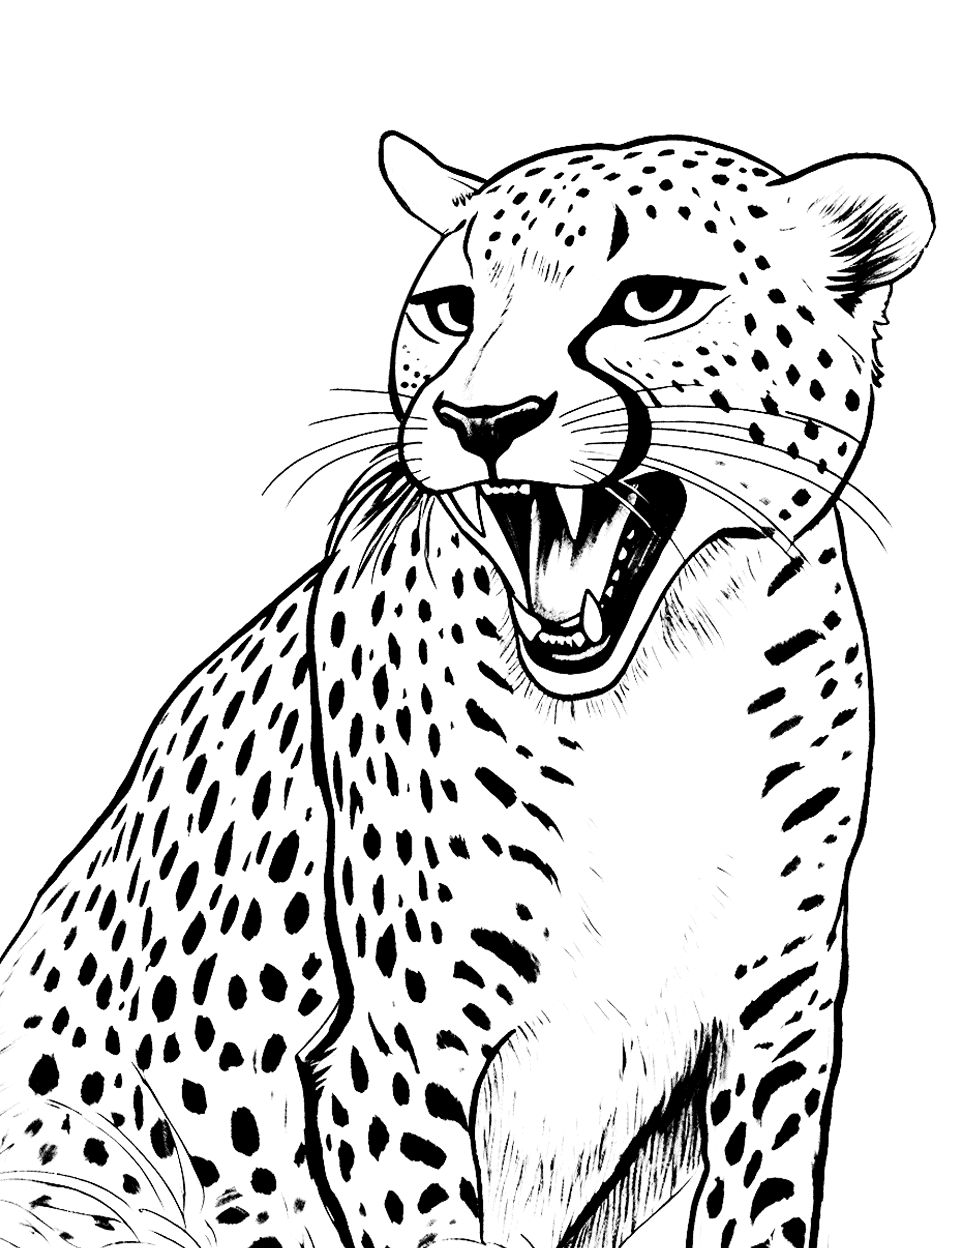 Cheetah in Mid-Roar Coloring Page - A dramatic scene of a cheetah roaring, showing off its teeth.